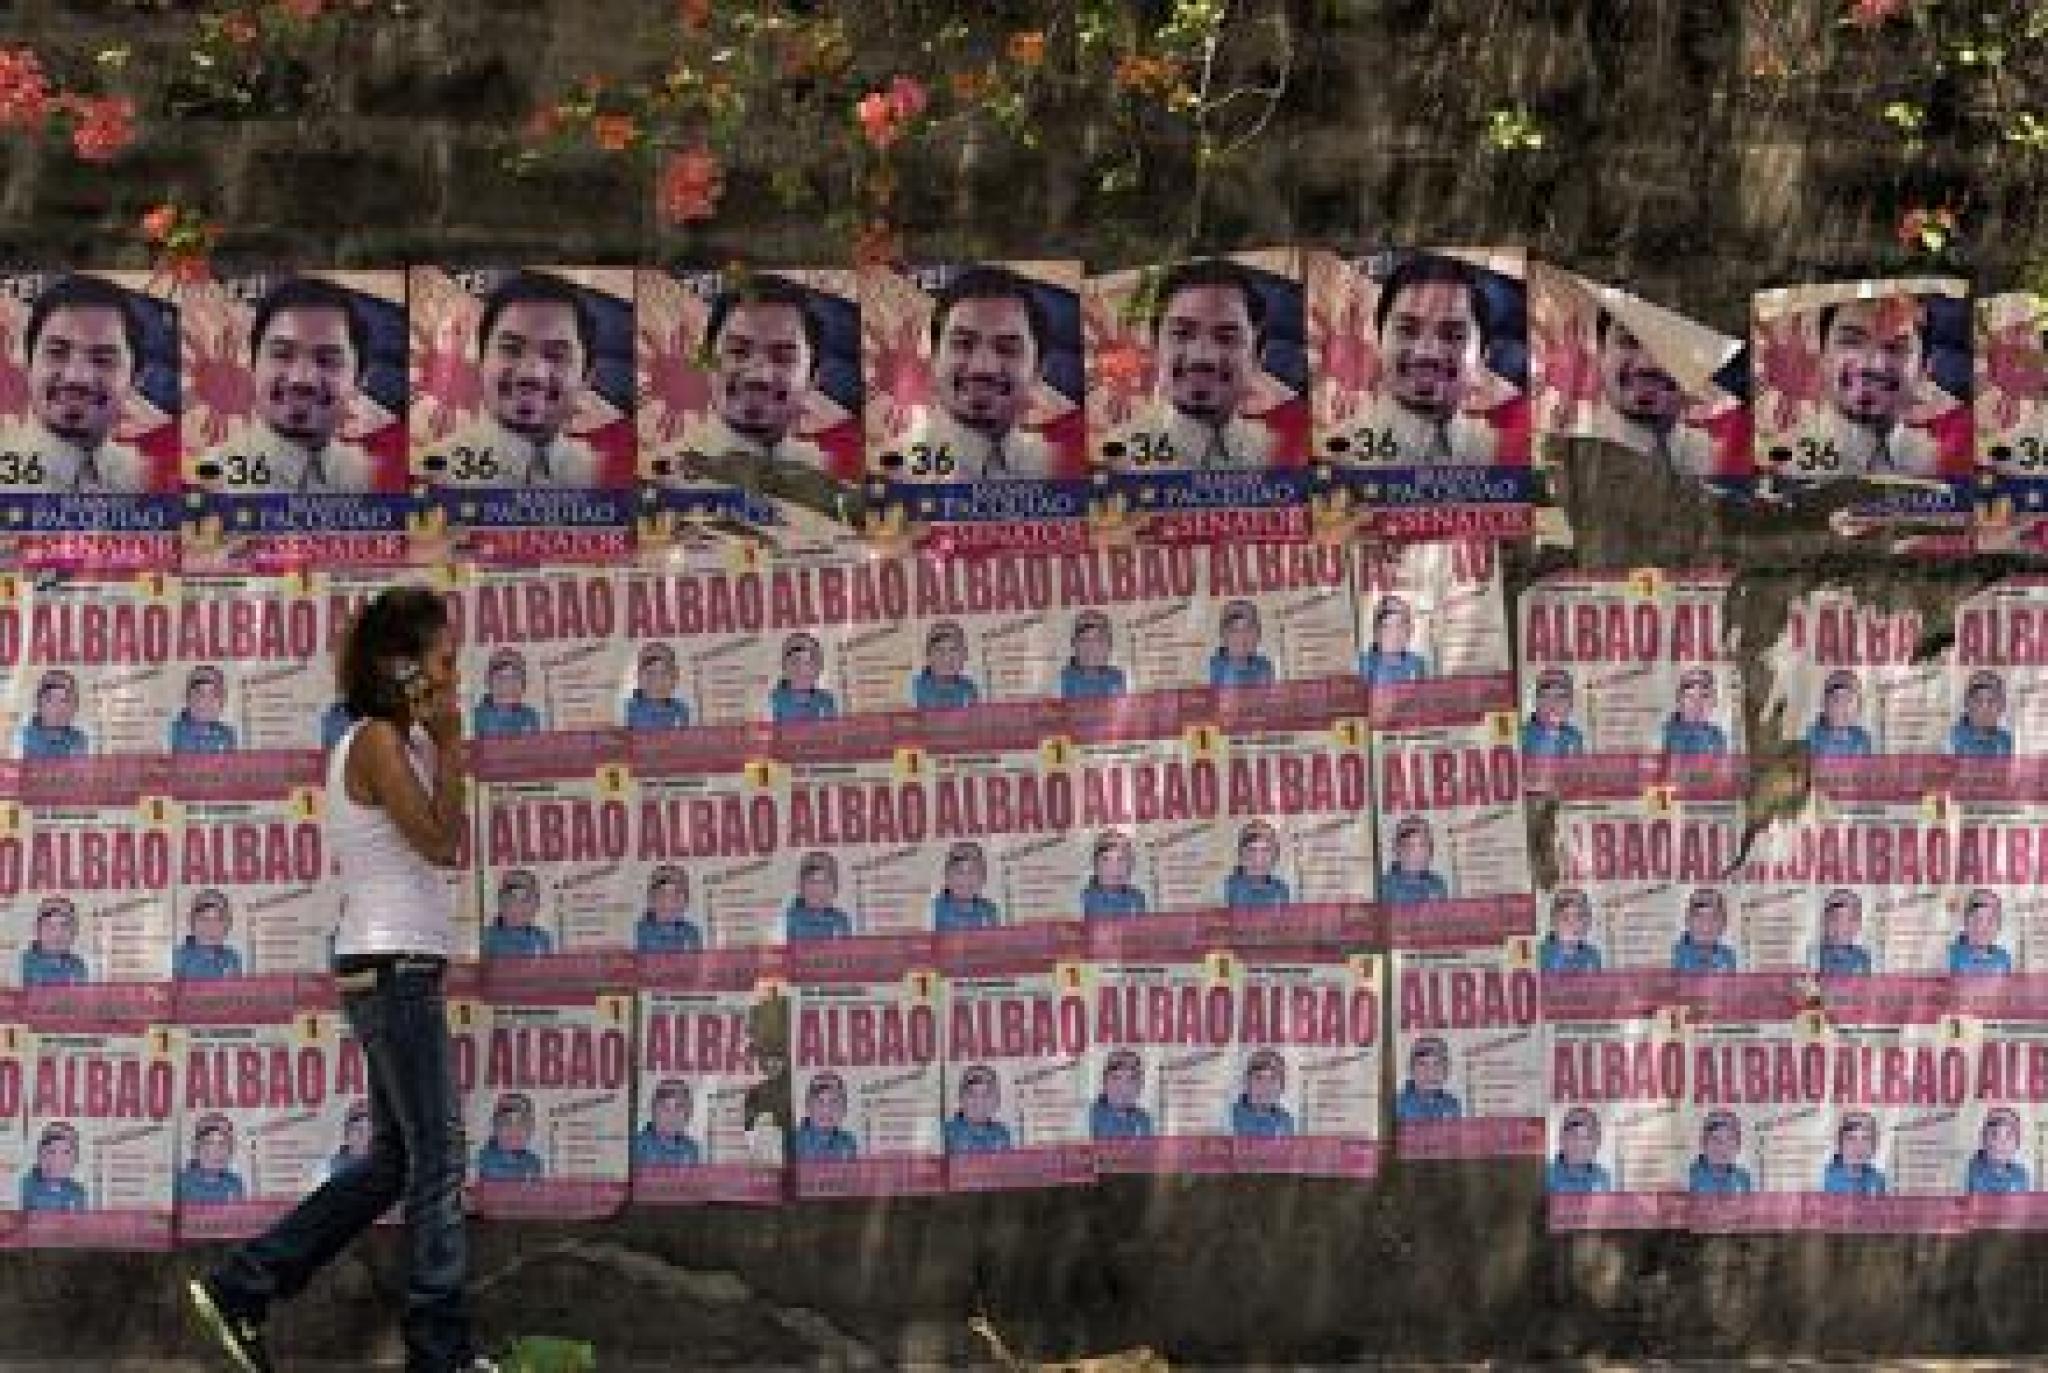 Wall plastered with election material, ahead of the Philippine local and National Election on the 9th May. Bacolod City, Philippines. Image by Brian Evans on Flickr under the CC BY-NC-ND 2.0 license.